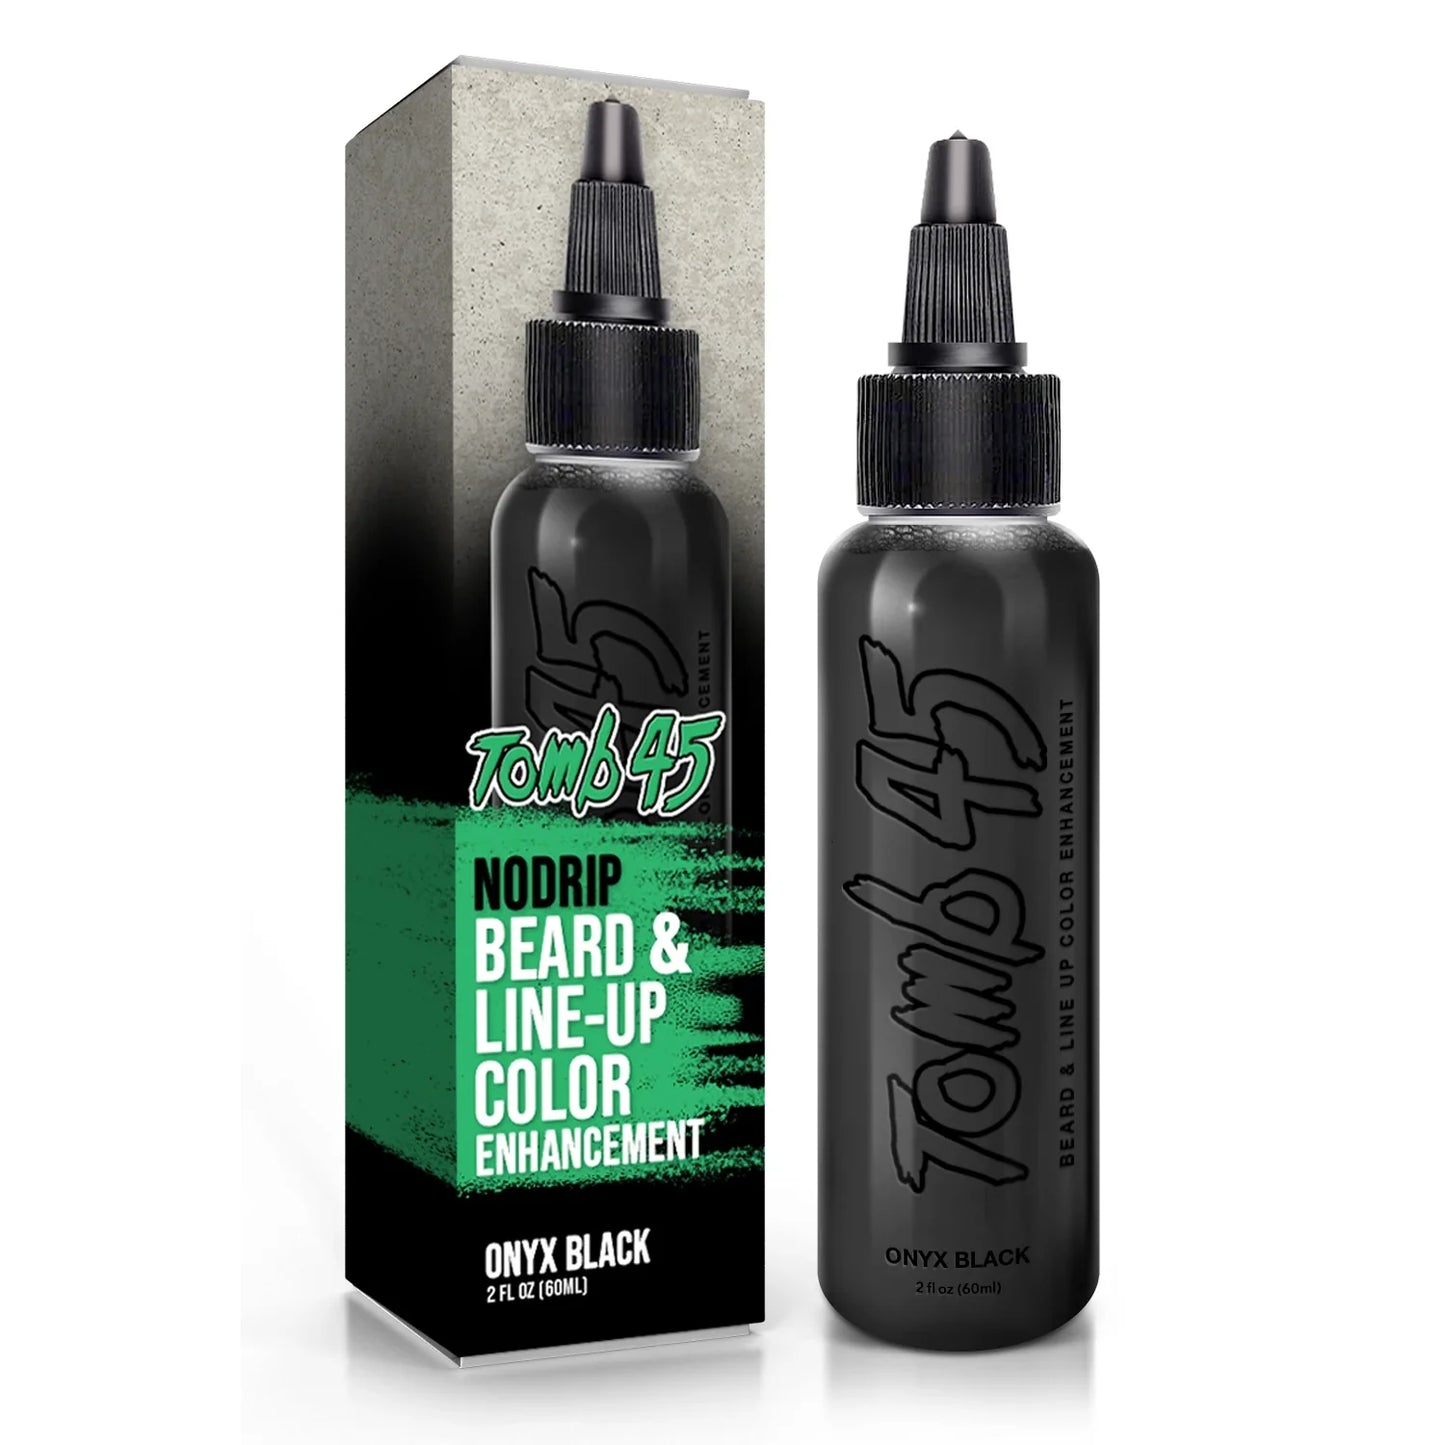 Tomb 45 Beard and Line Up Color Enhancement - Onyx Black - 2oz.